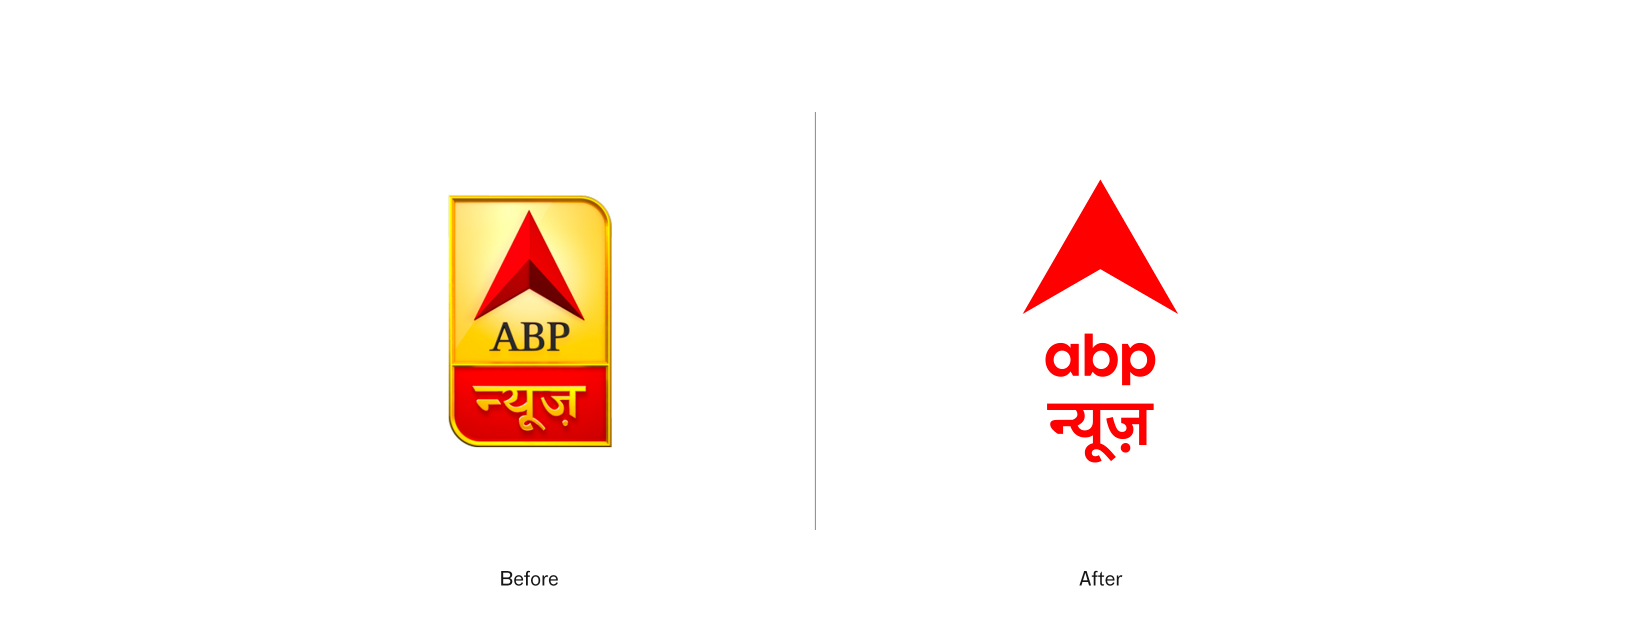 ABP before after 2